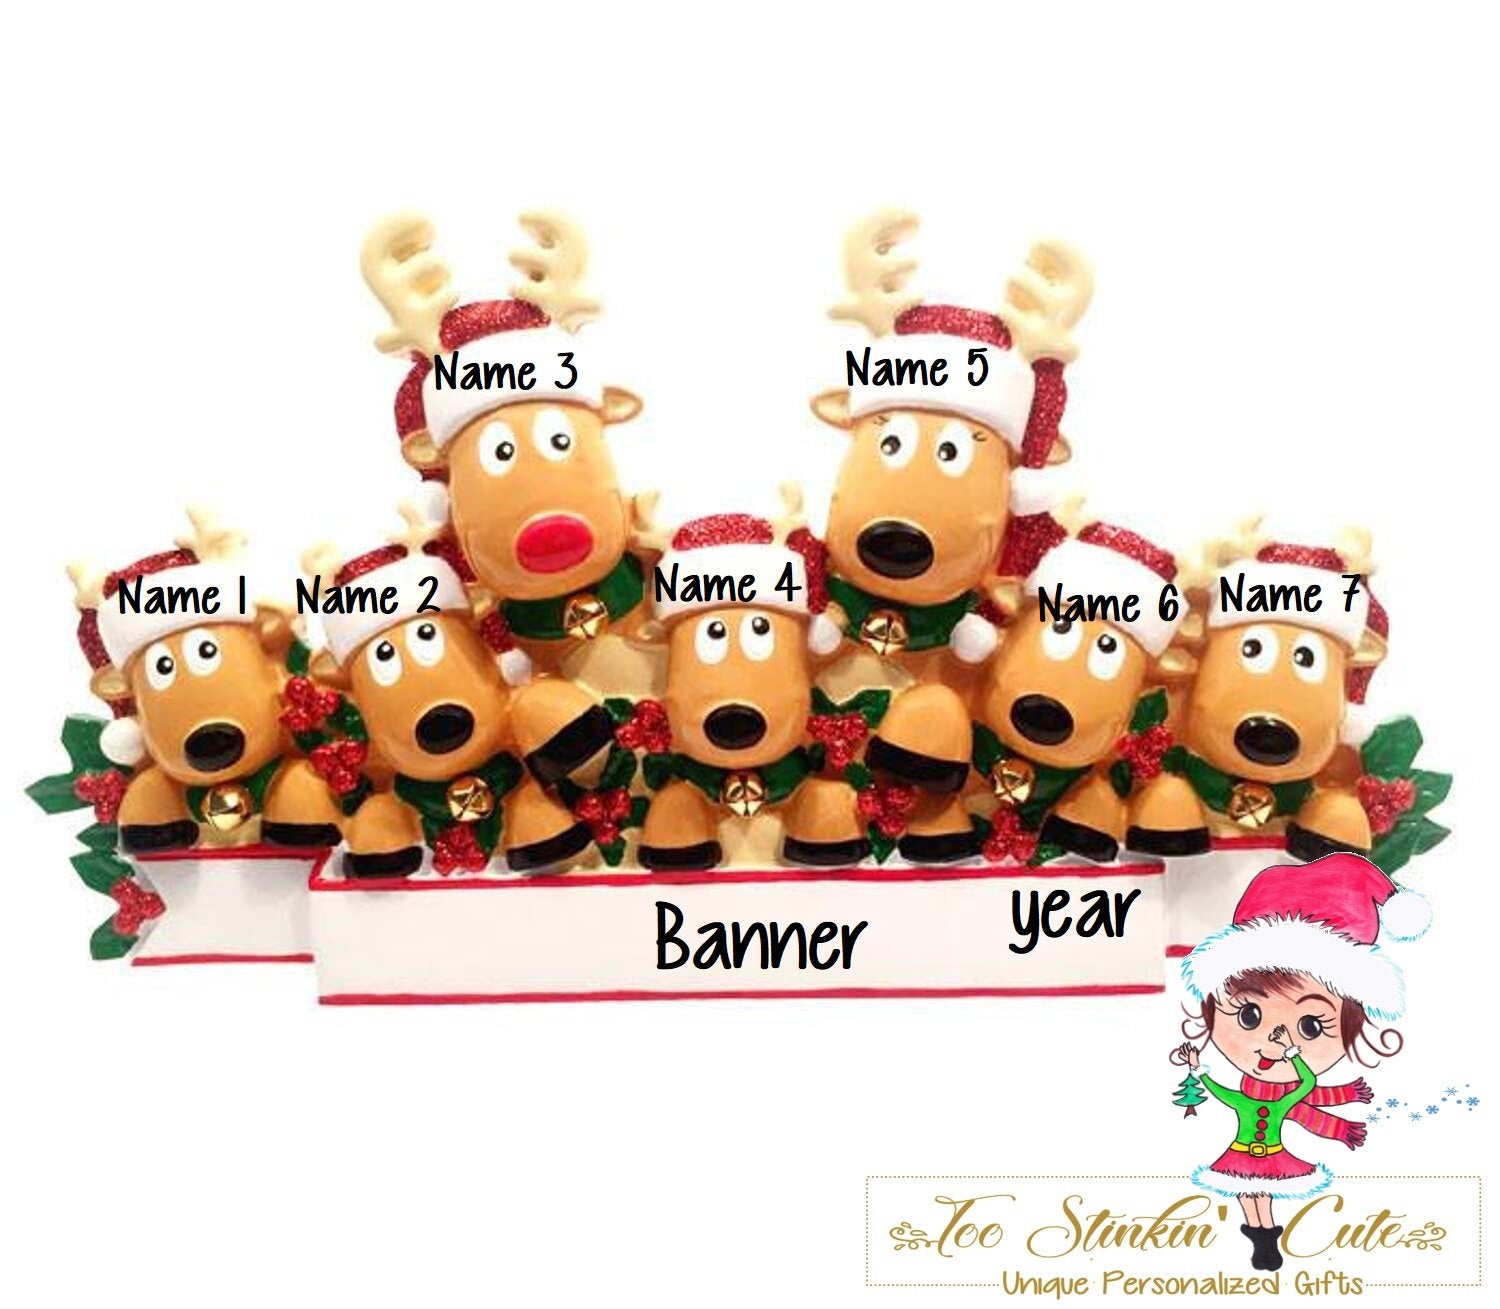 Personalized Christmas Table Topper Reindeer Family of 7 + Free Shipping!